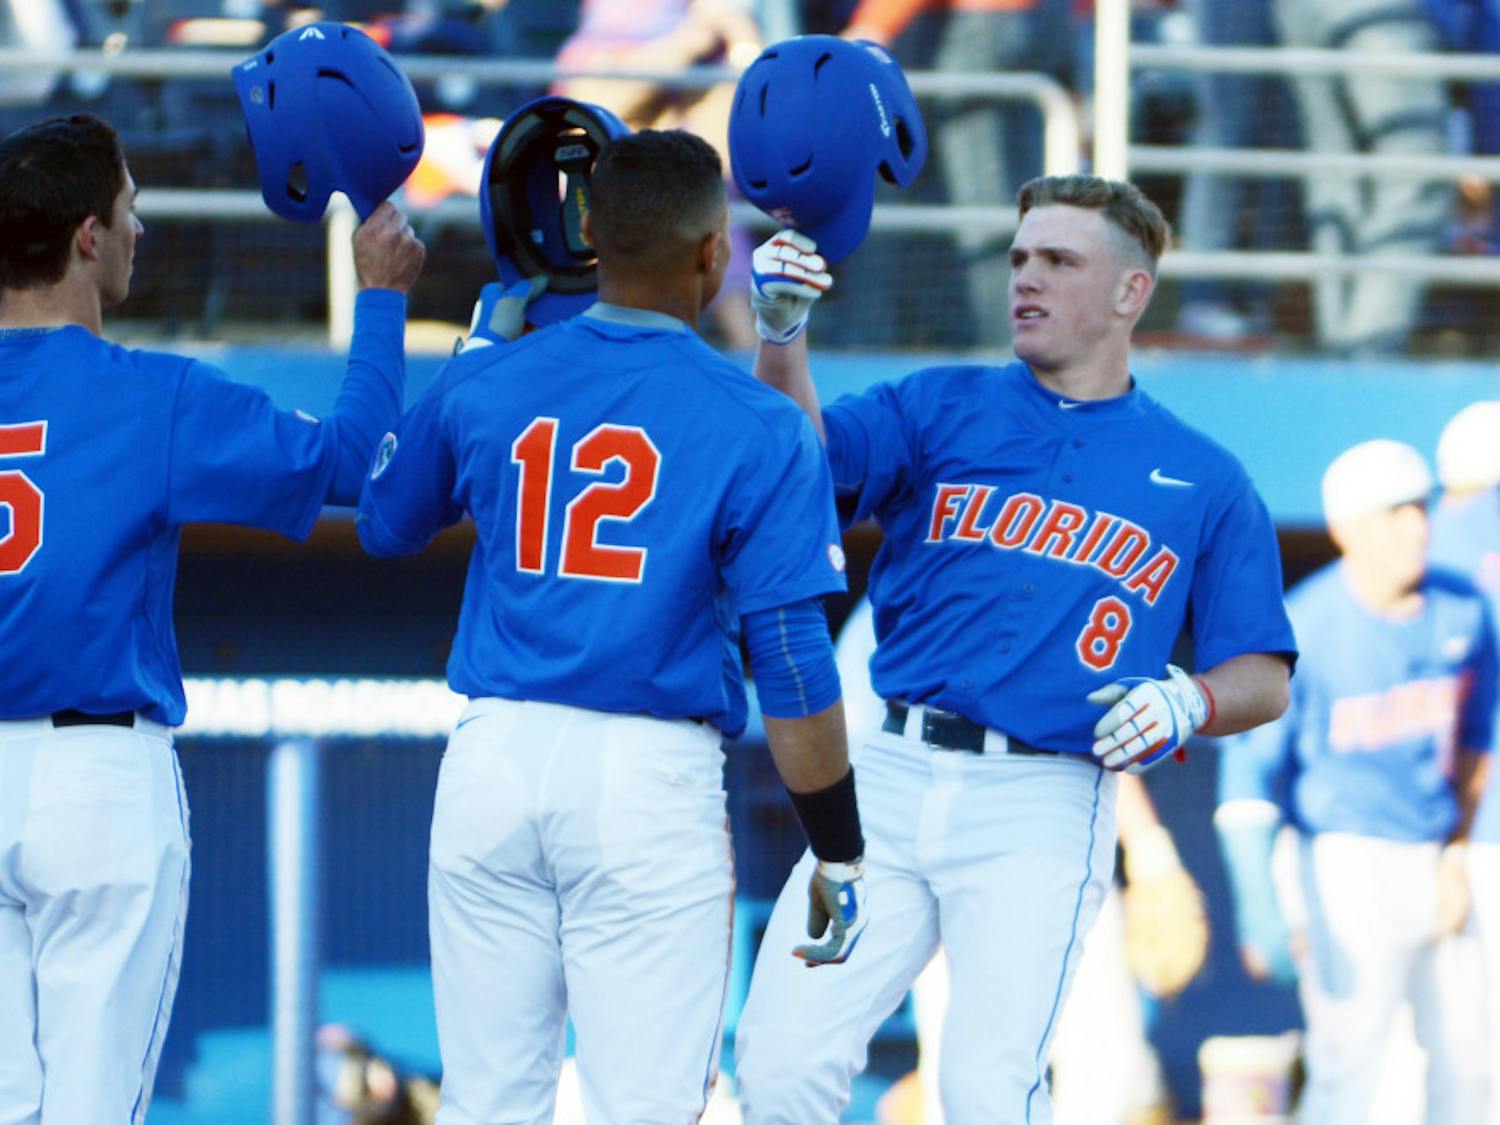 Harrison Bader (8) celebrates with Dalton Guthrie (5) and Richie Martin (12) after hitting a home run during Florida's 22-3 win against Rhode Island on Saturday at McKethan Stadium.